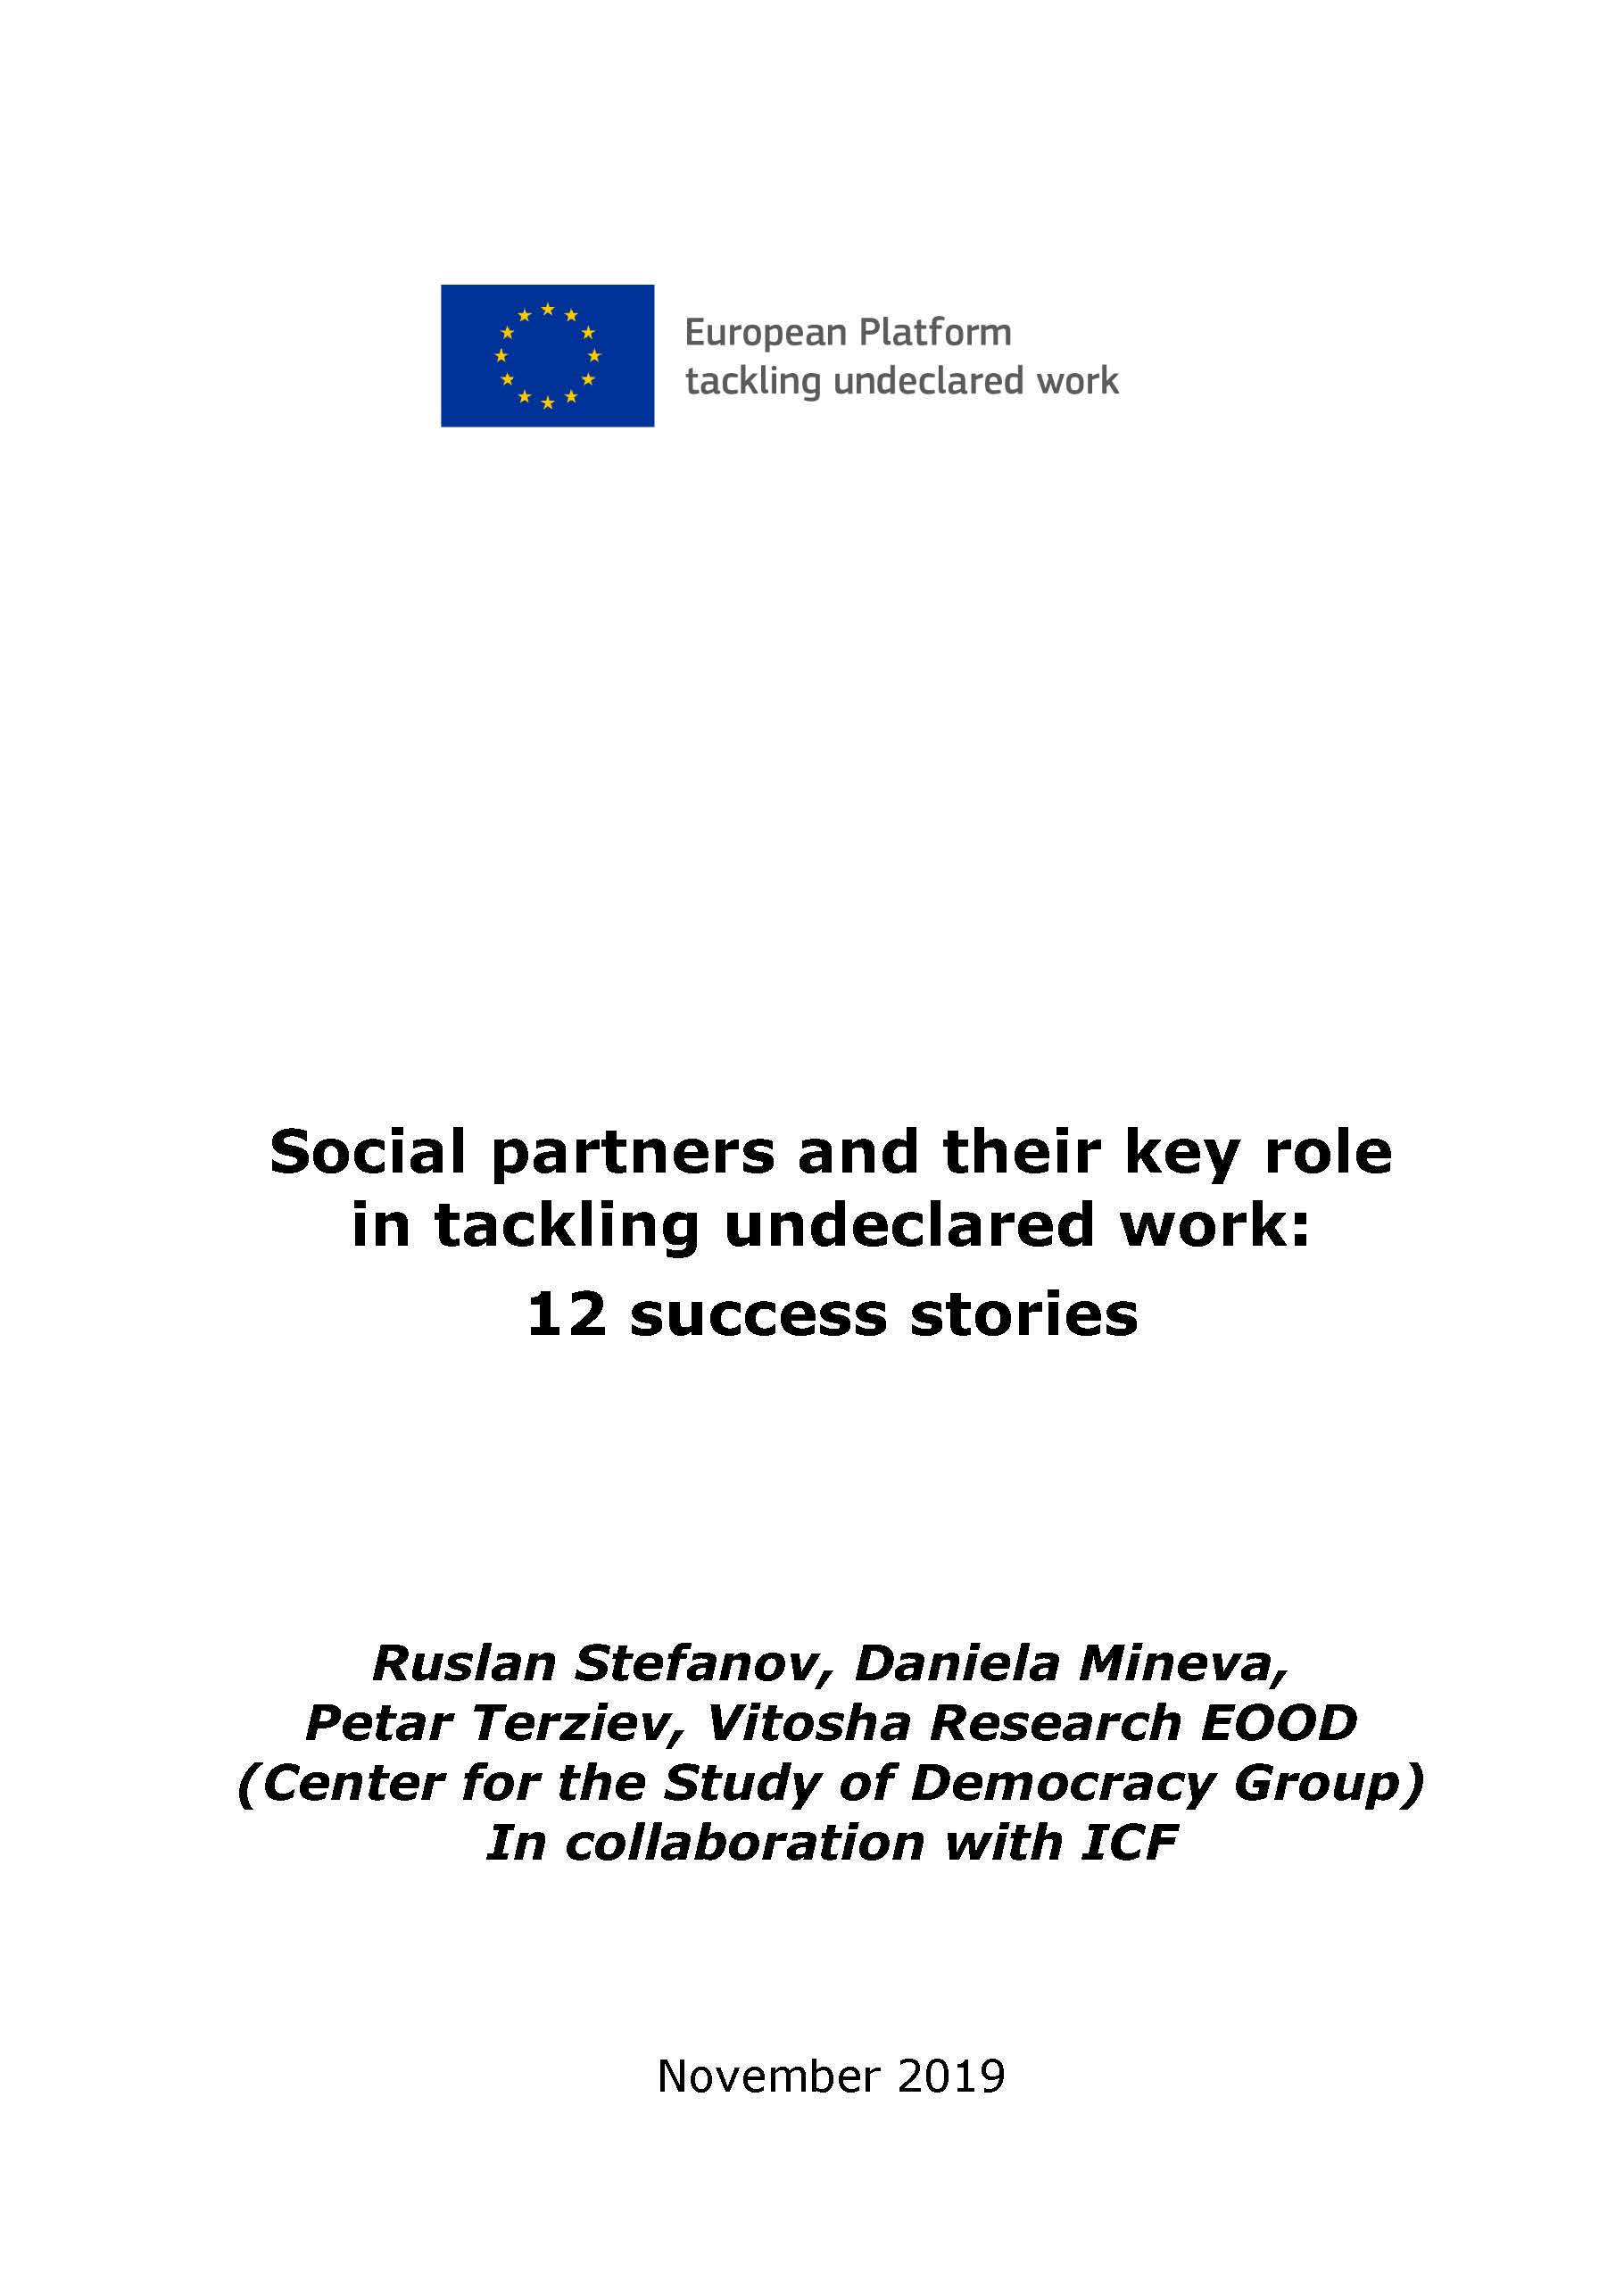 Social partners and their key role in tackling undeclared work: 12 success Cover Image